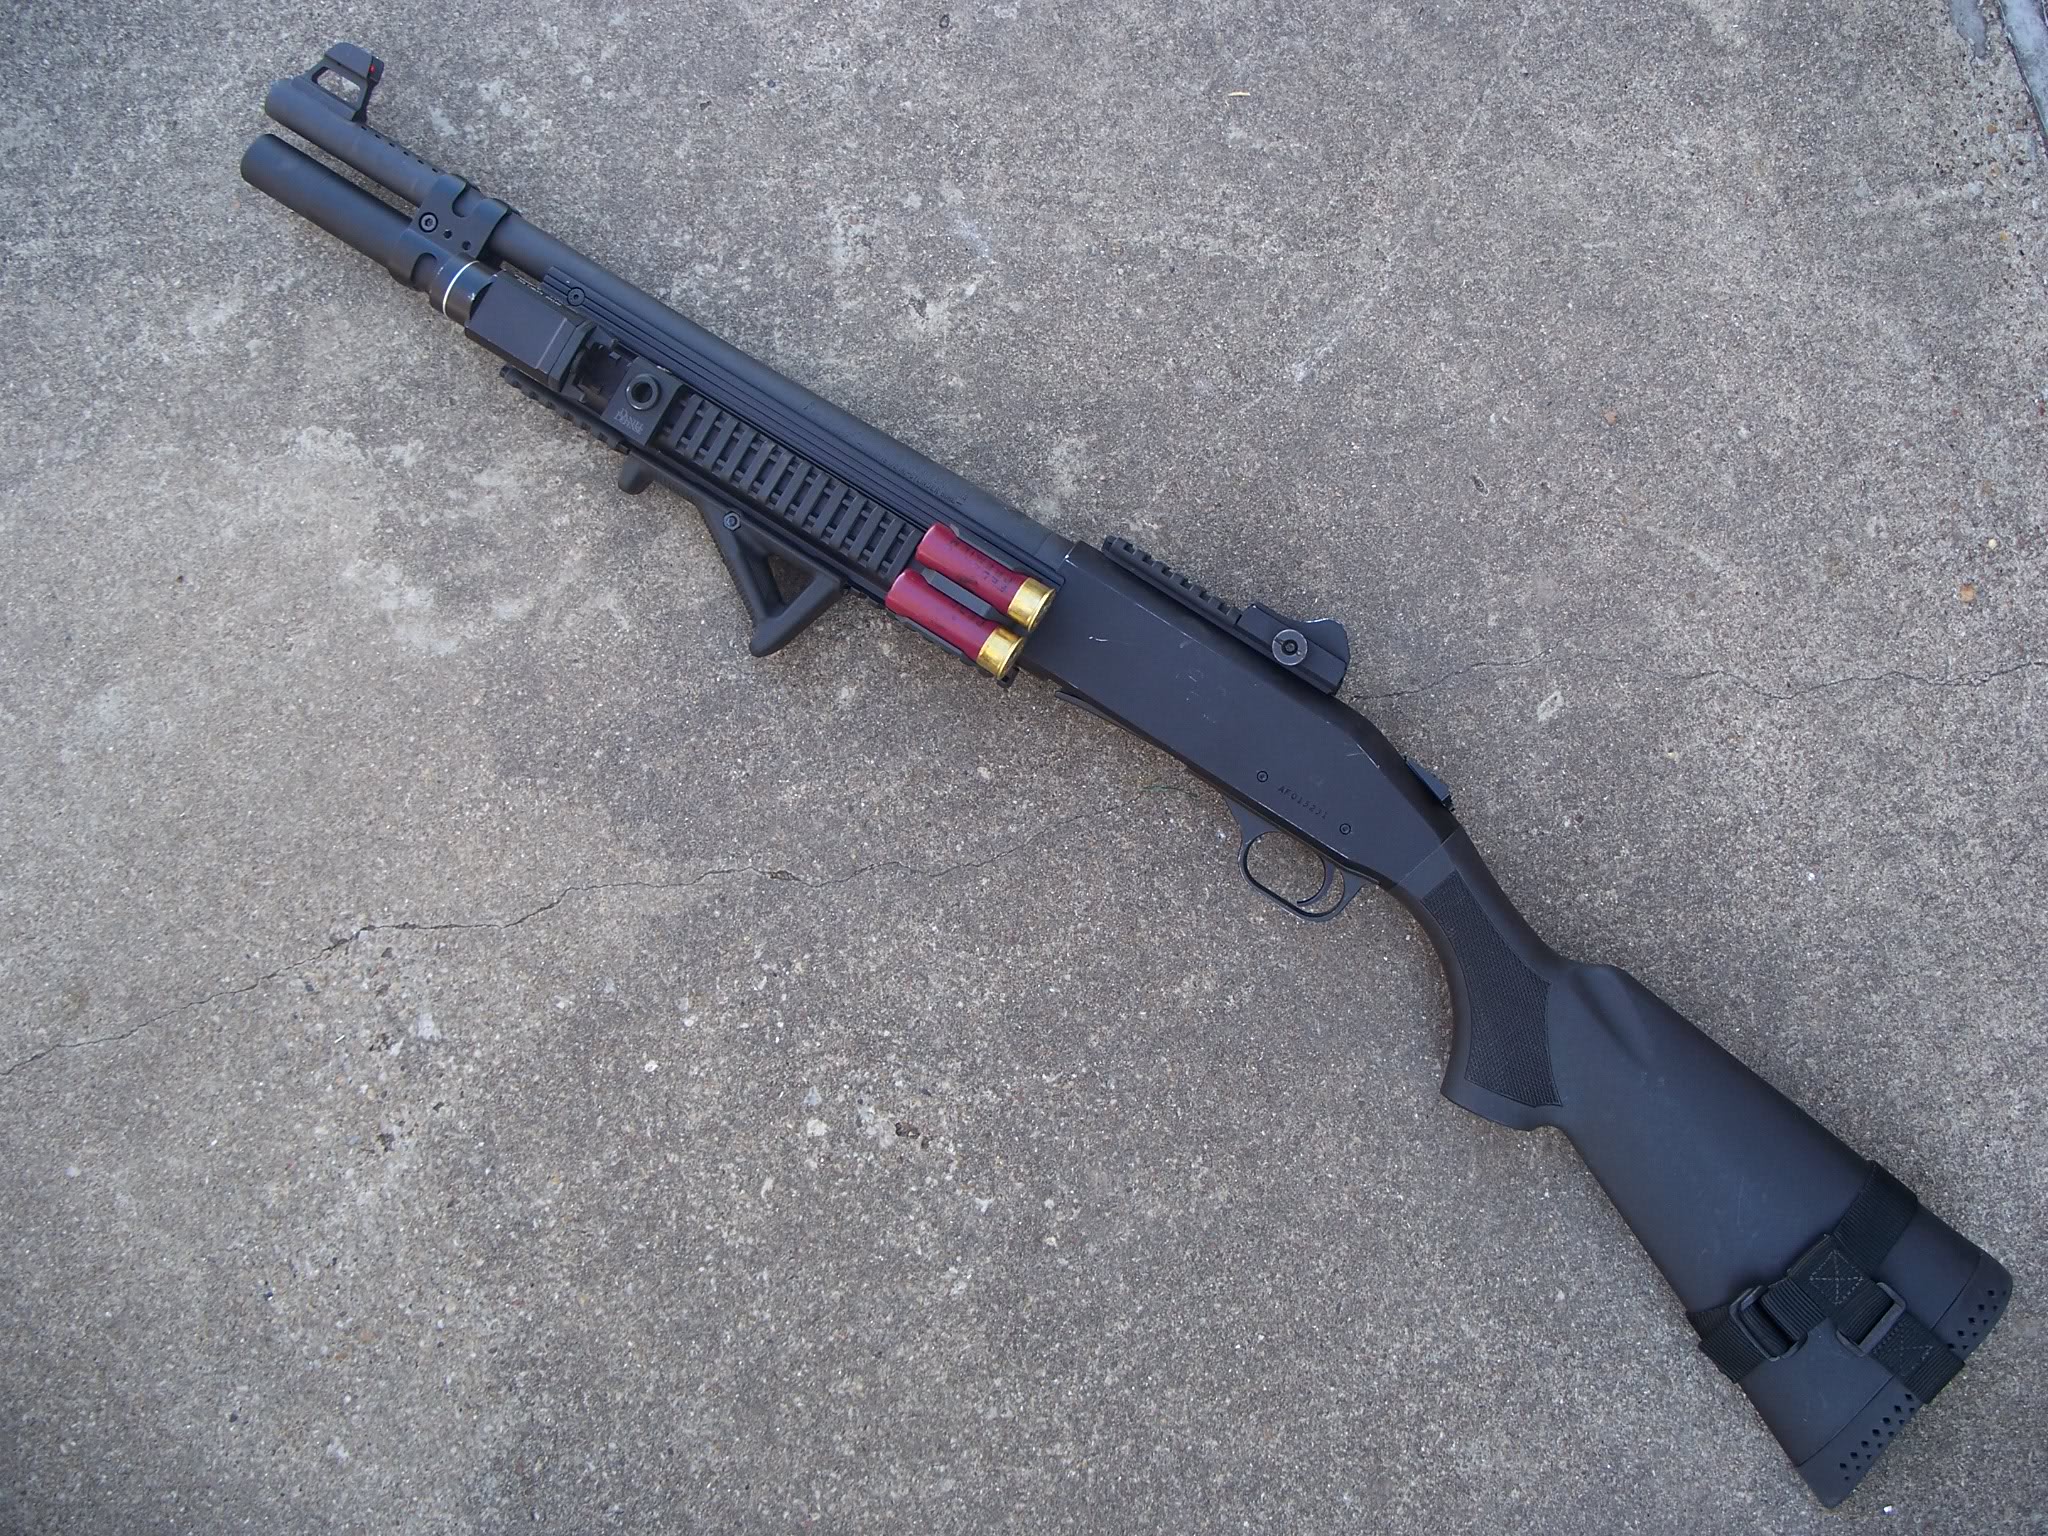 Amazing Mossberg 930 Pictures & Backgrounds